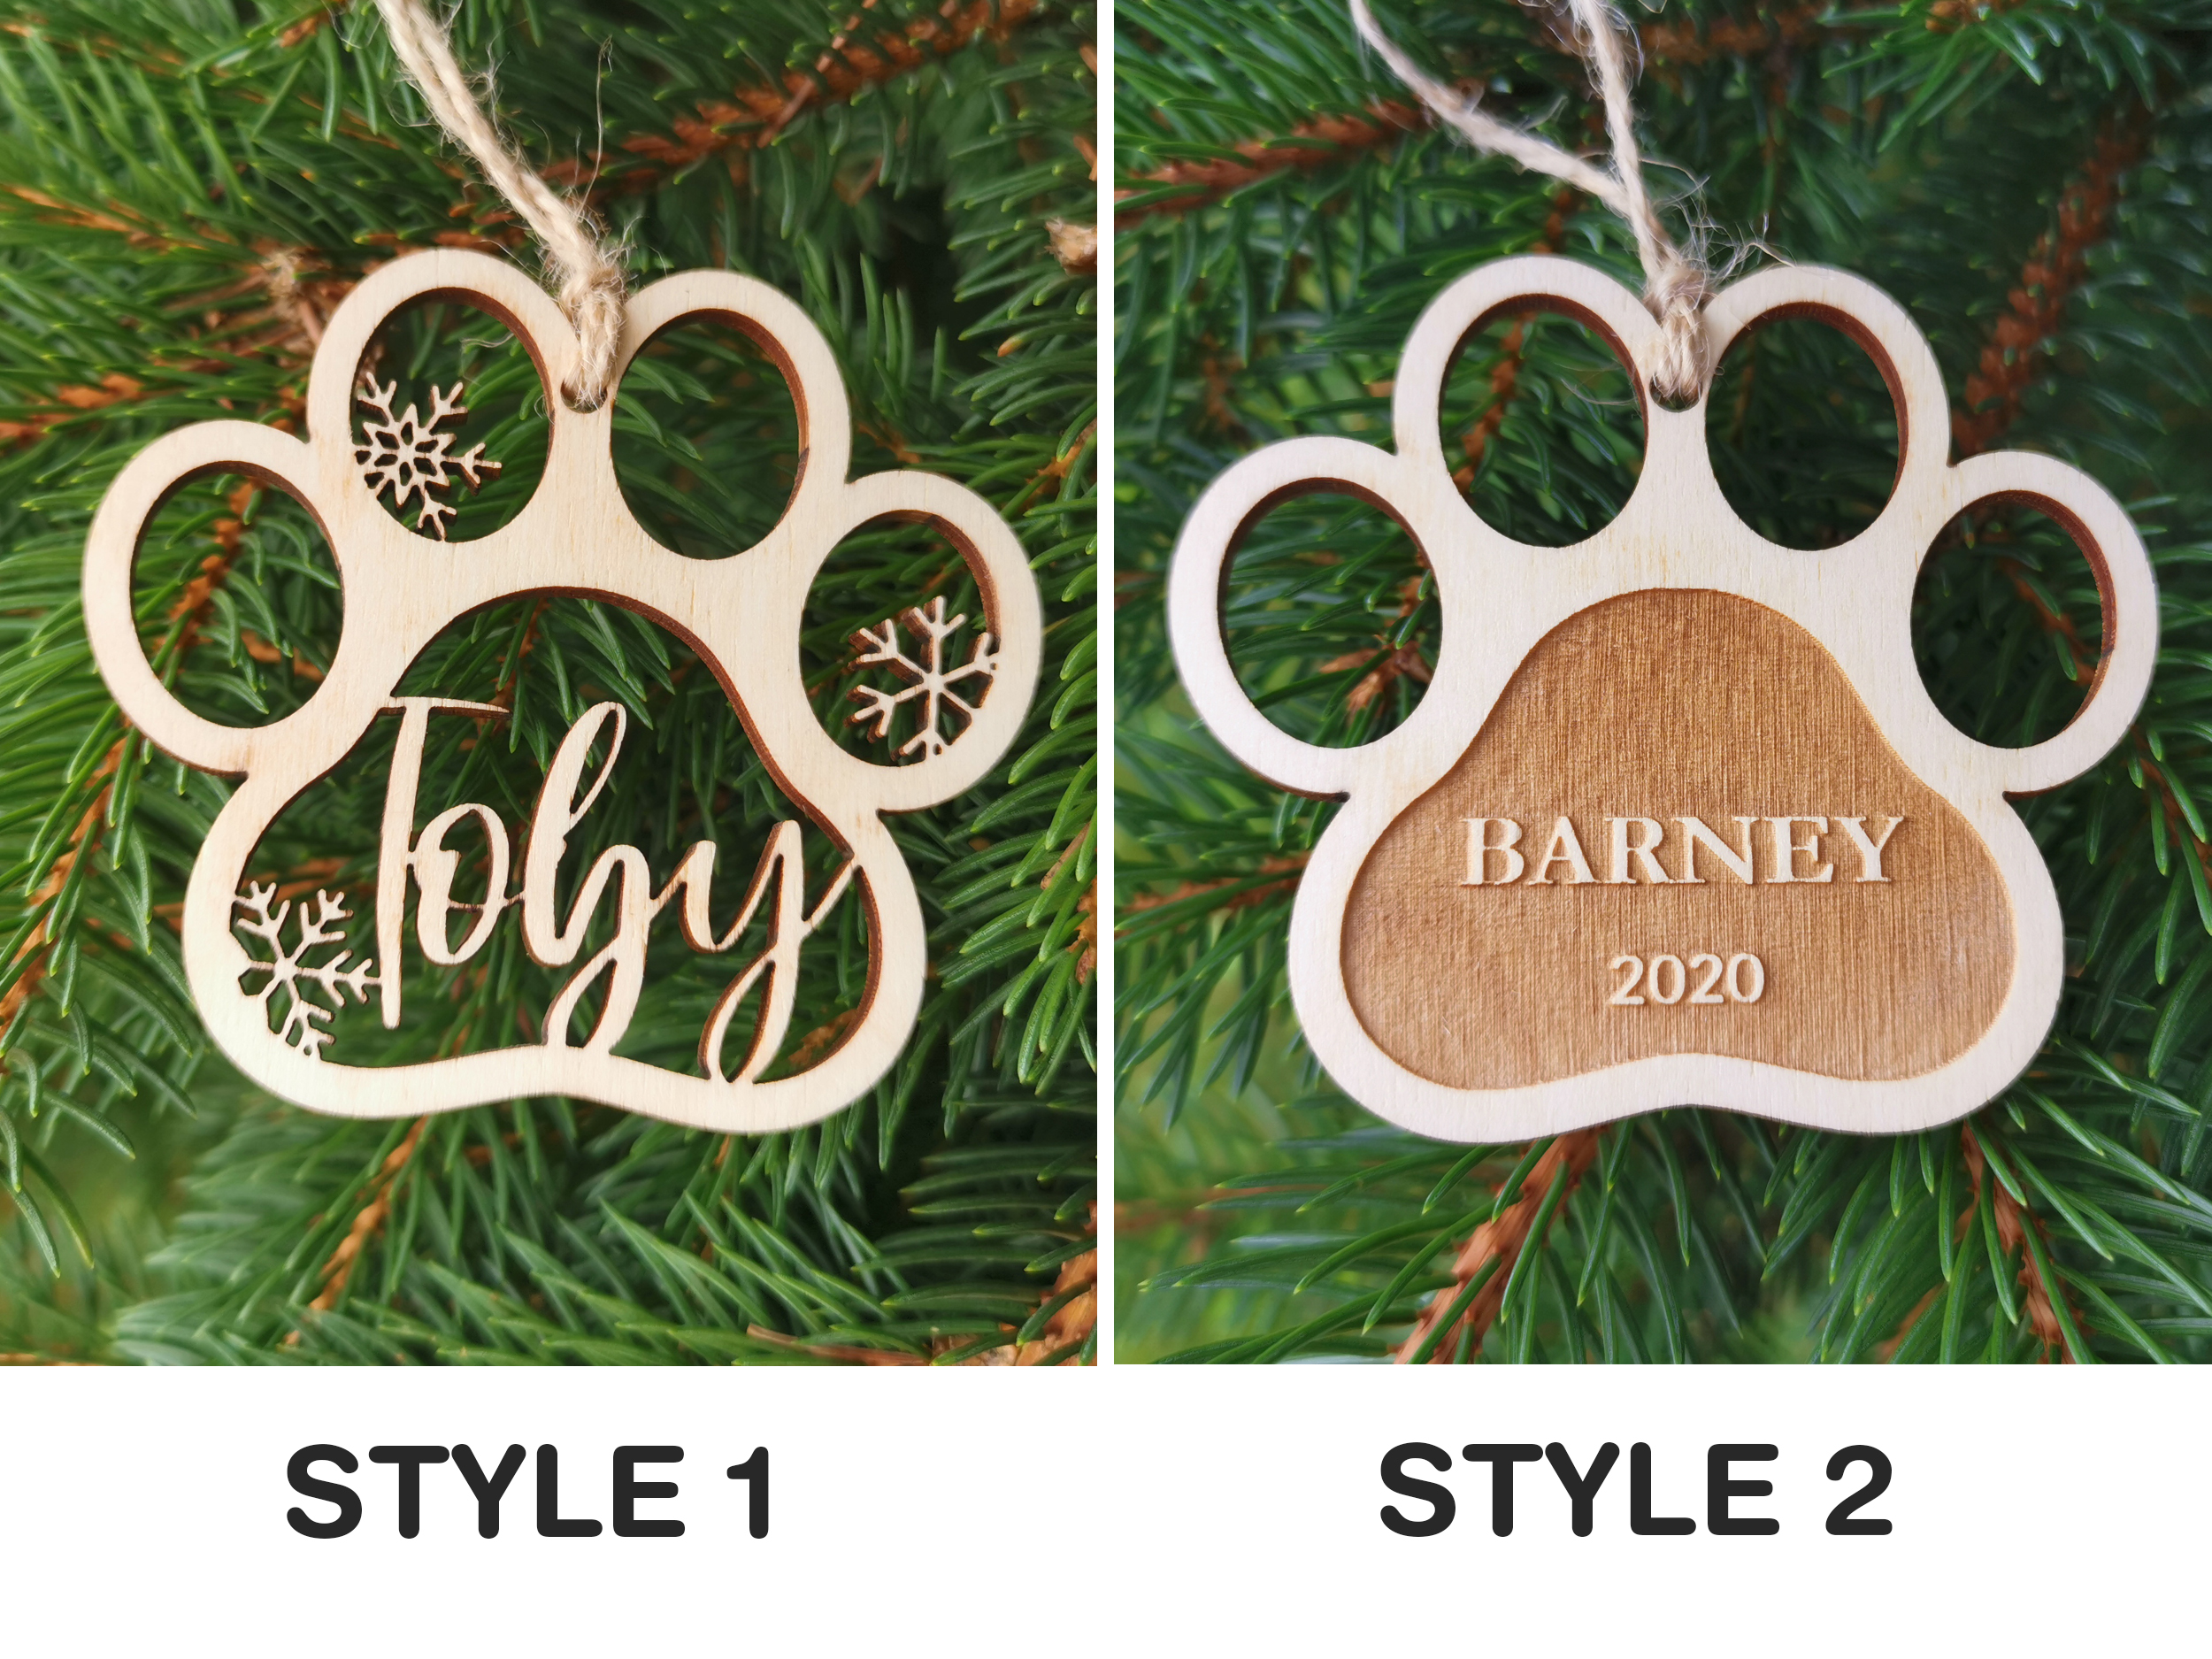 Tabby Cat Personalised Name Christmas Tree Bauble Decoration Gift AC-204DA2CB